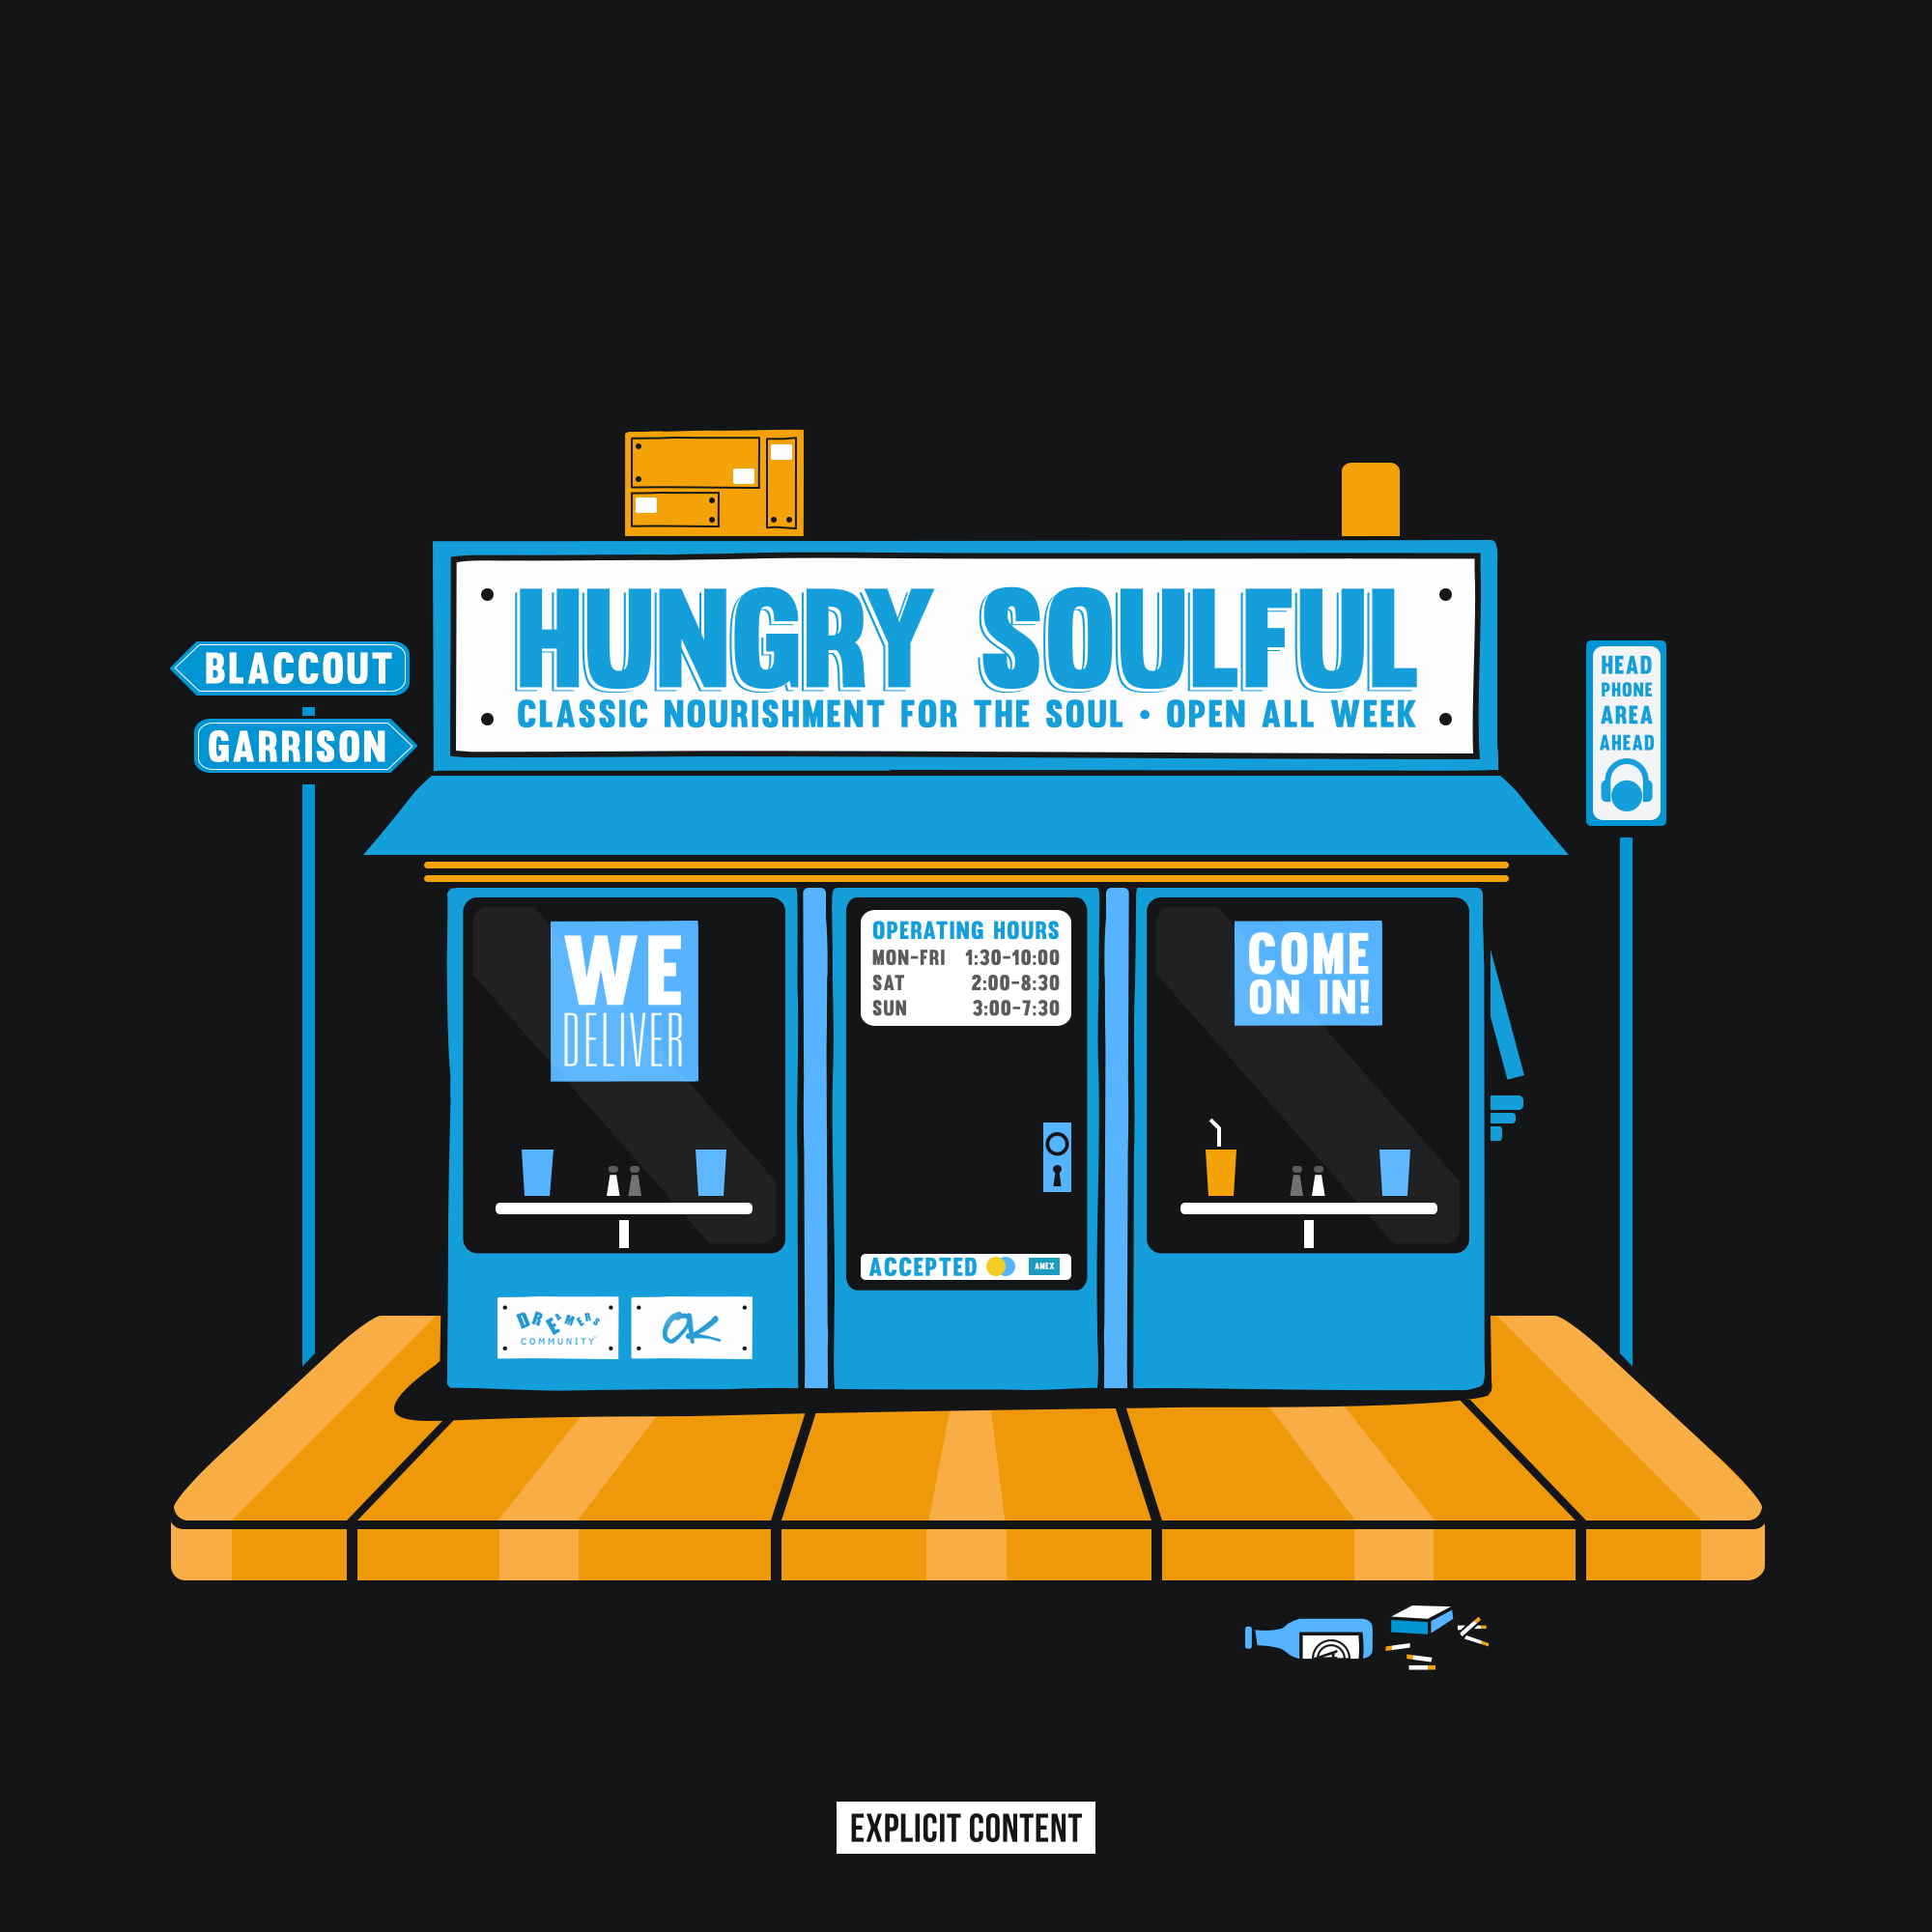 BlaccOut Garrison - "Hungry Soulful" (Release)